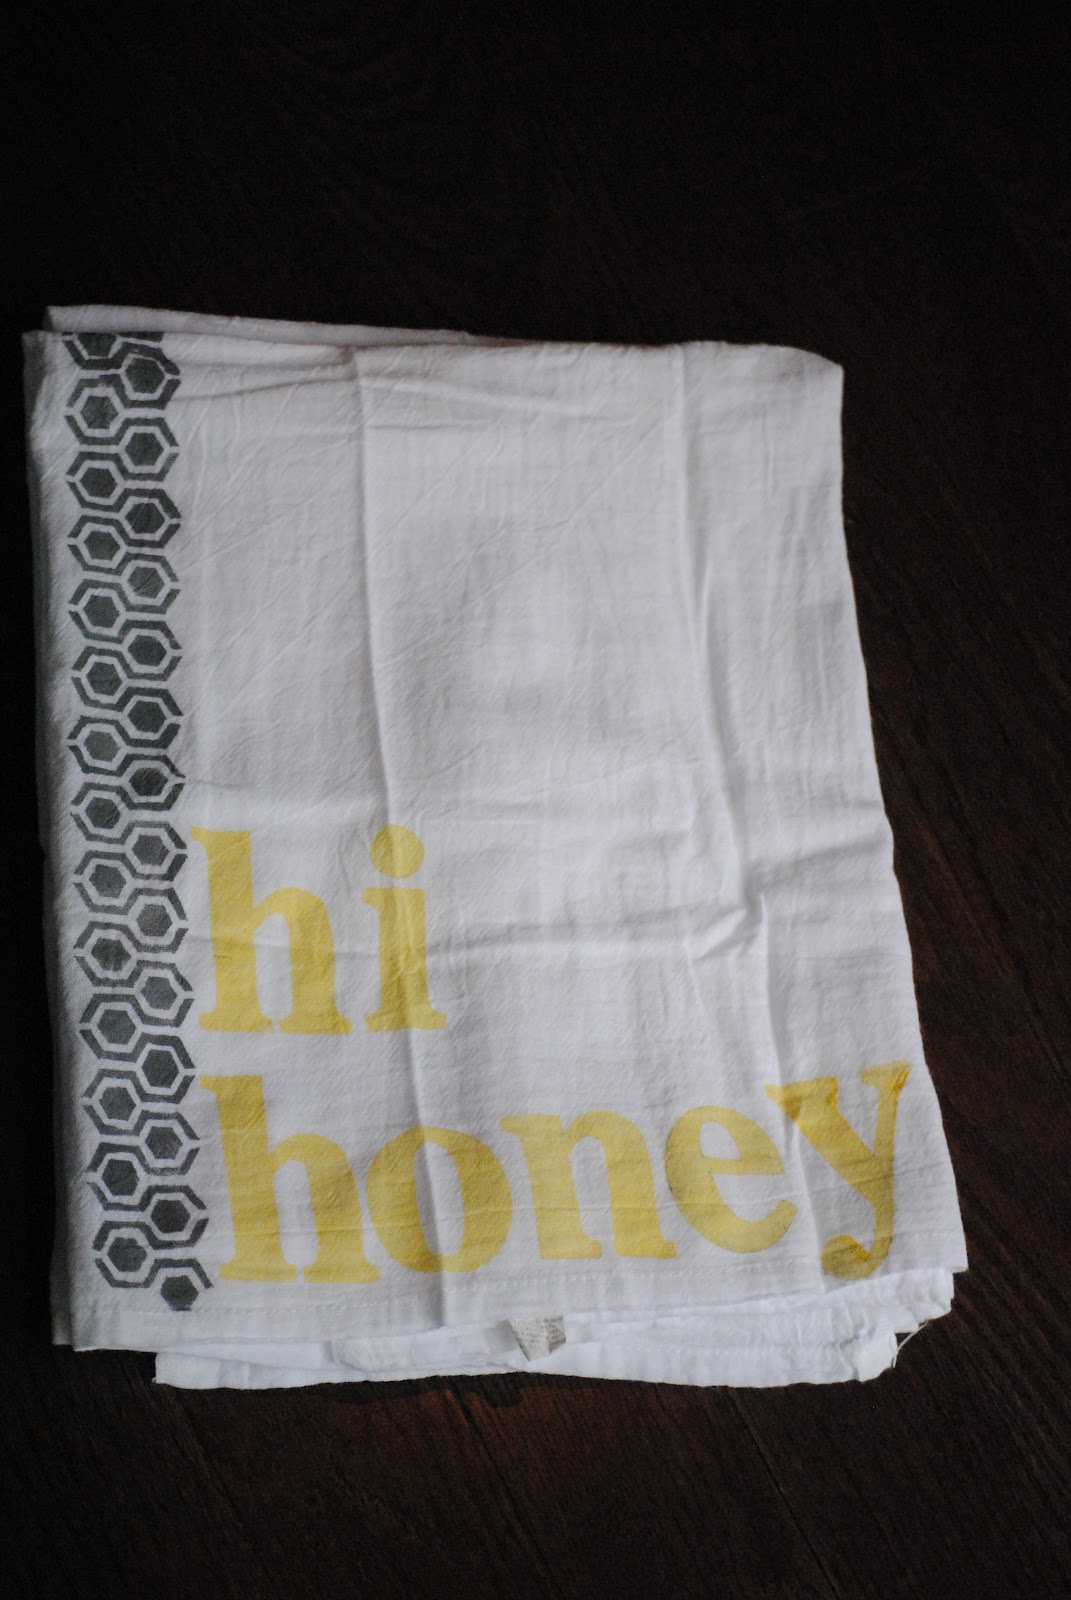 These Are the Best Kitchen Towels, and They're Just Over $1 Each